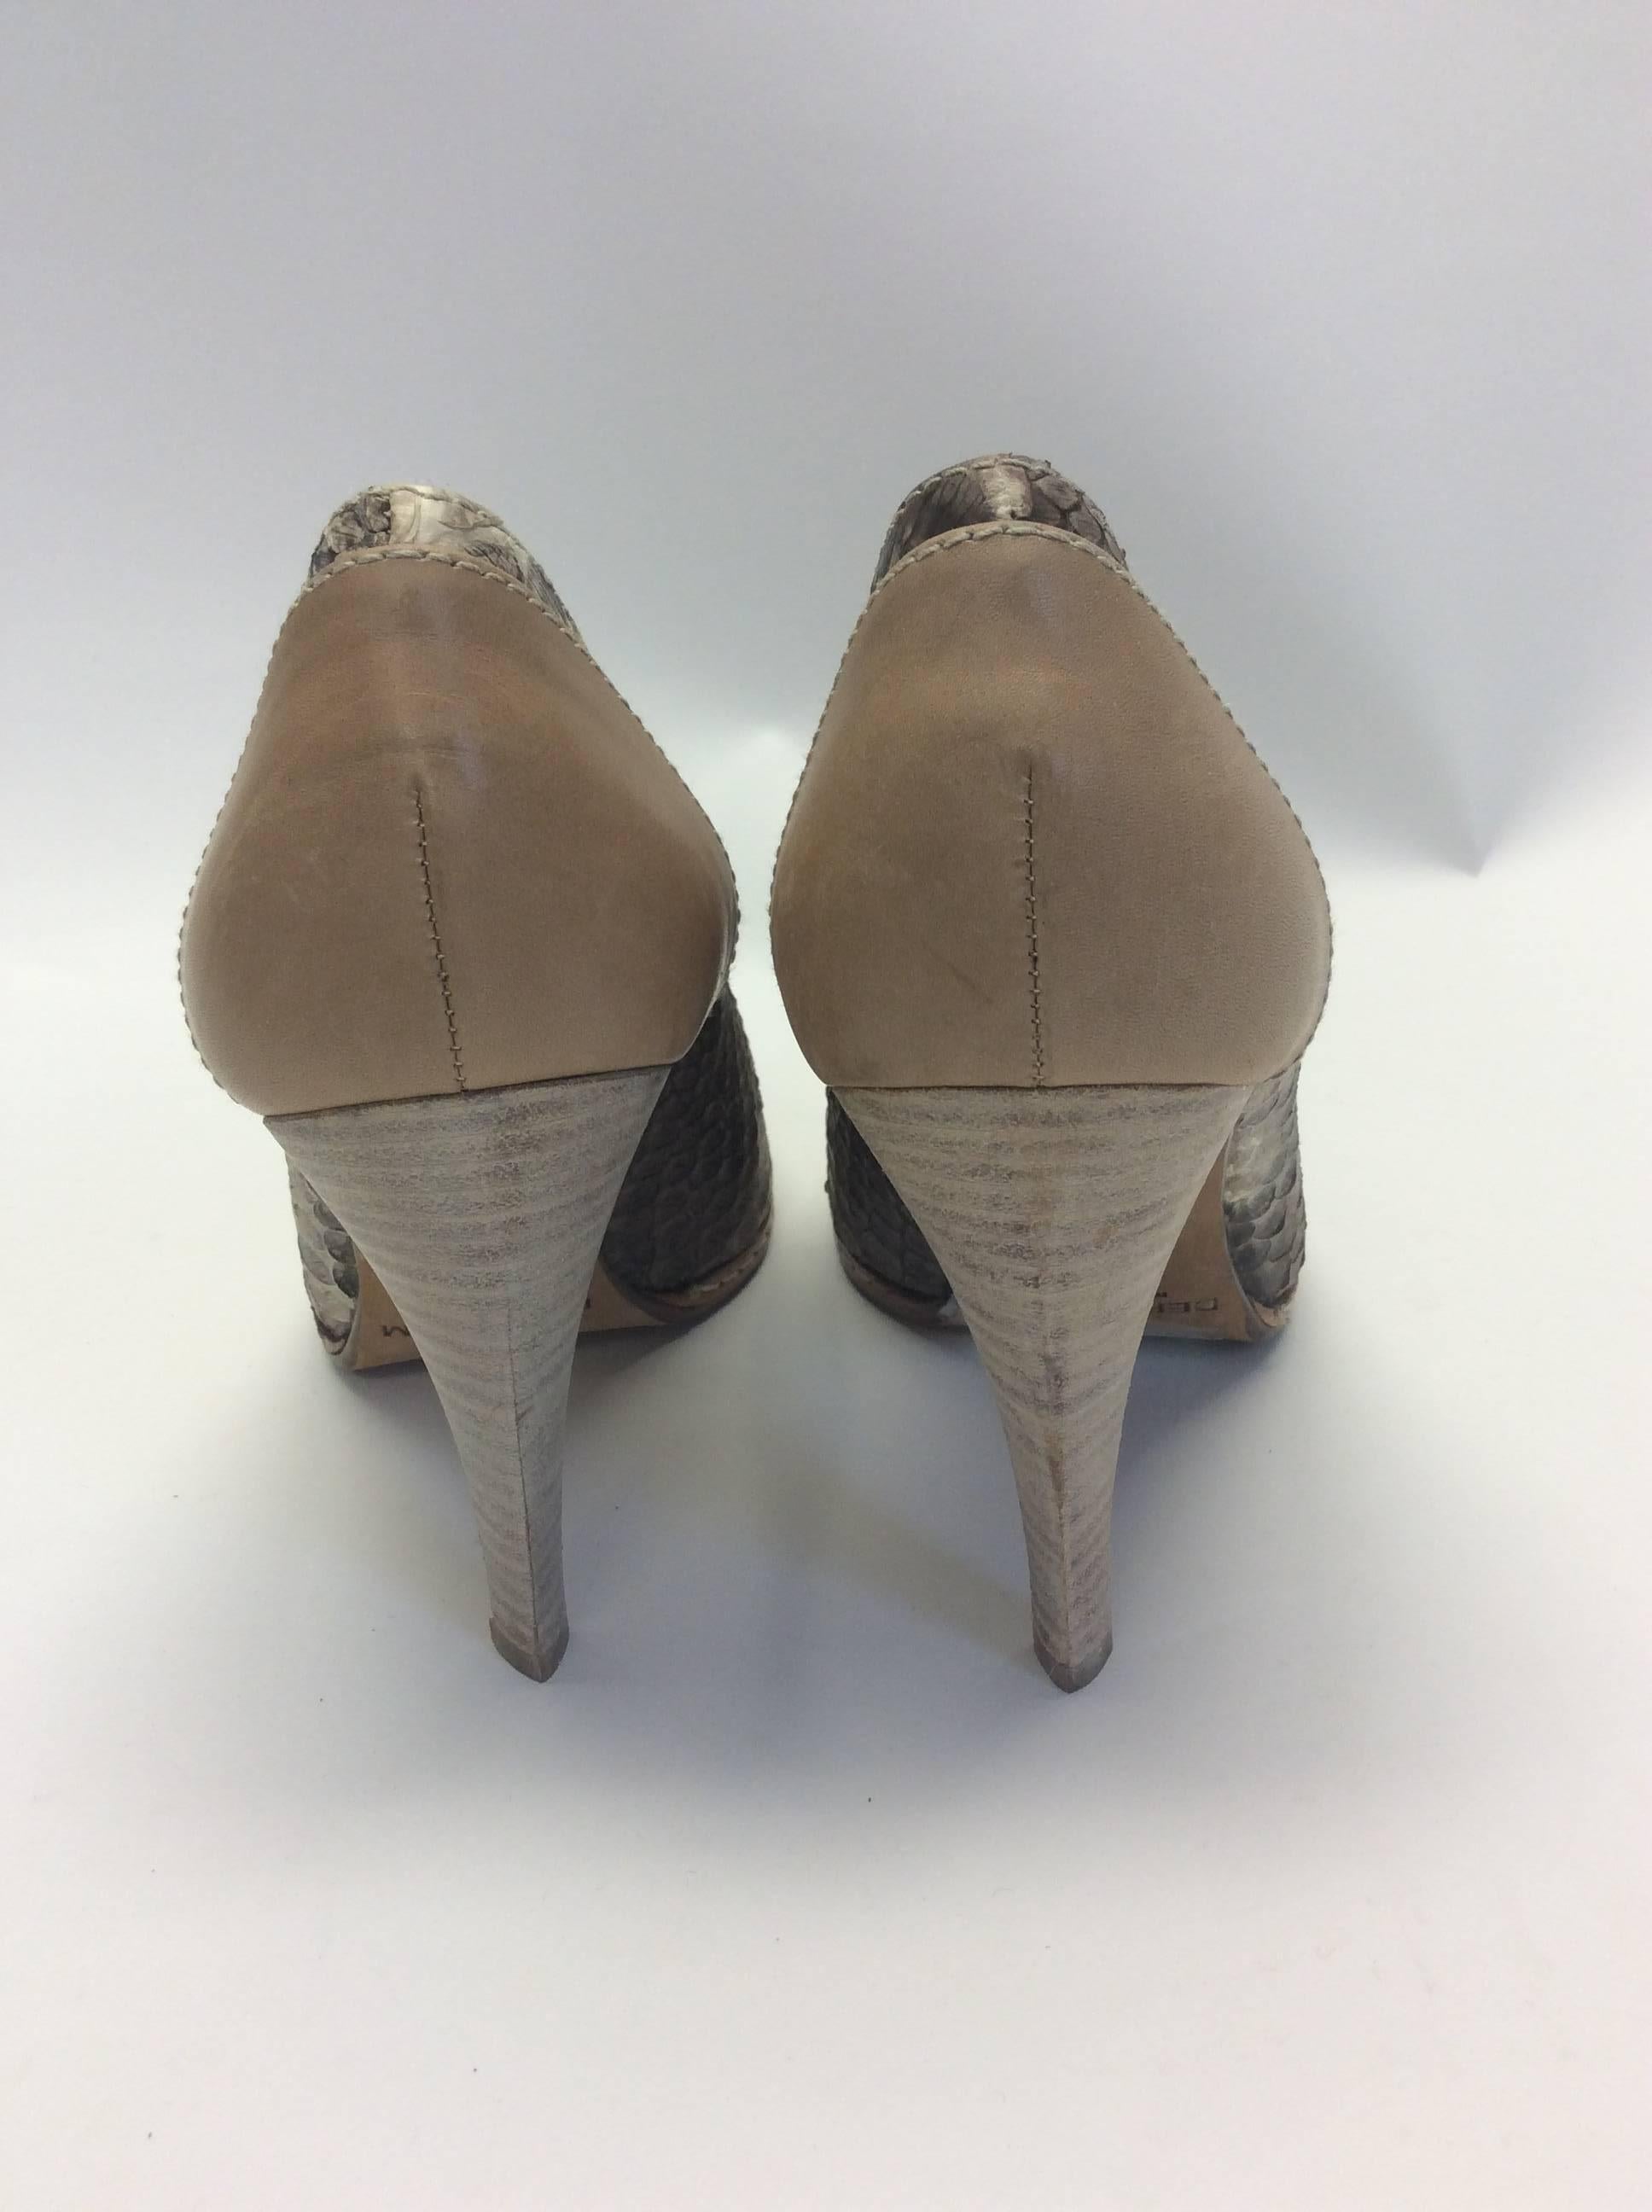 Derek Lam Snake Skin Pump In Excellent Condition For Sale In Narberth, PA